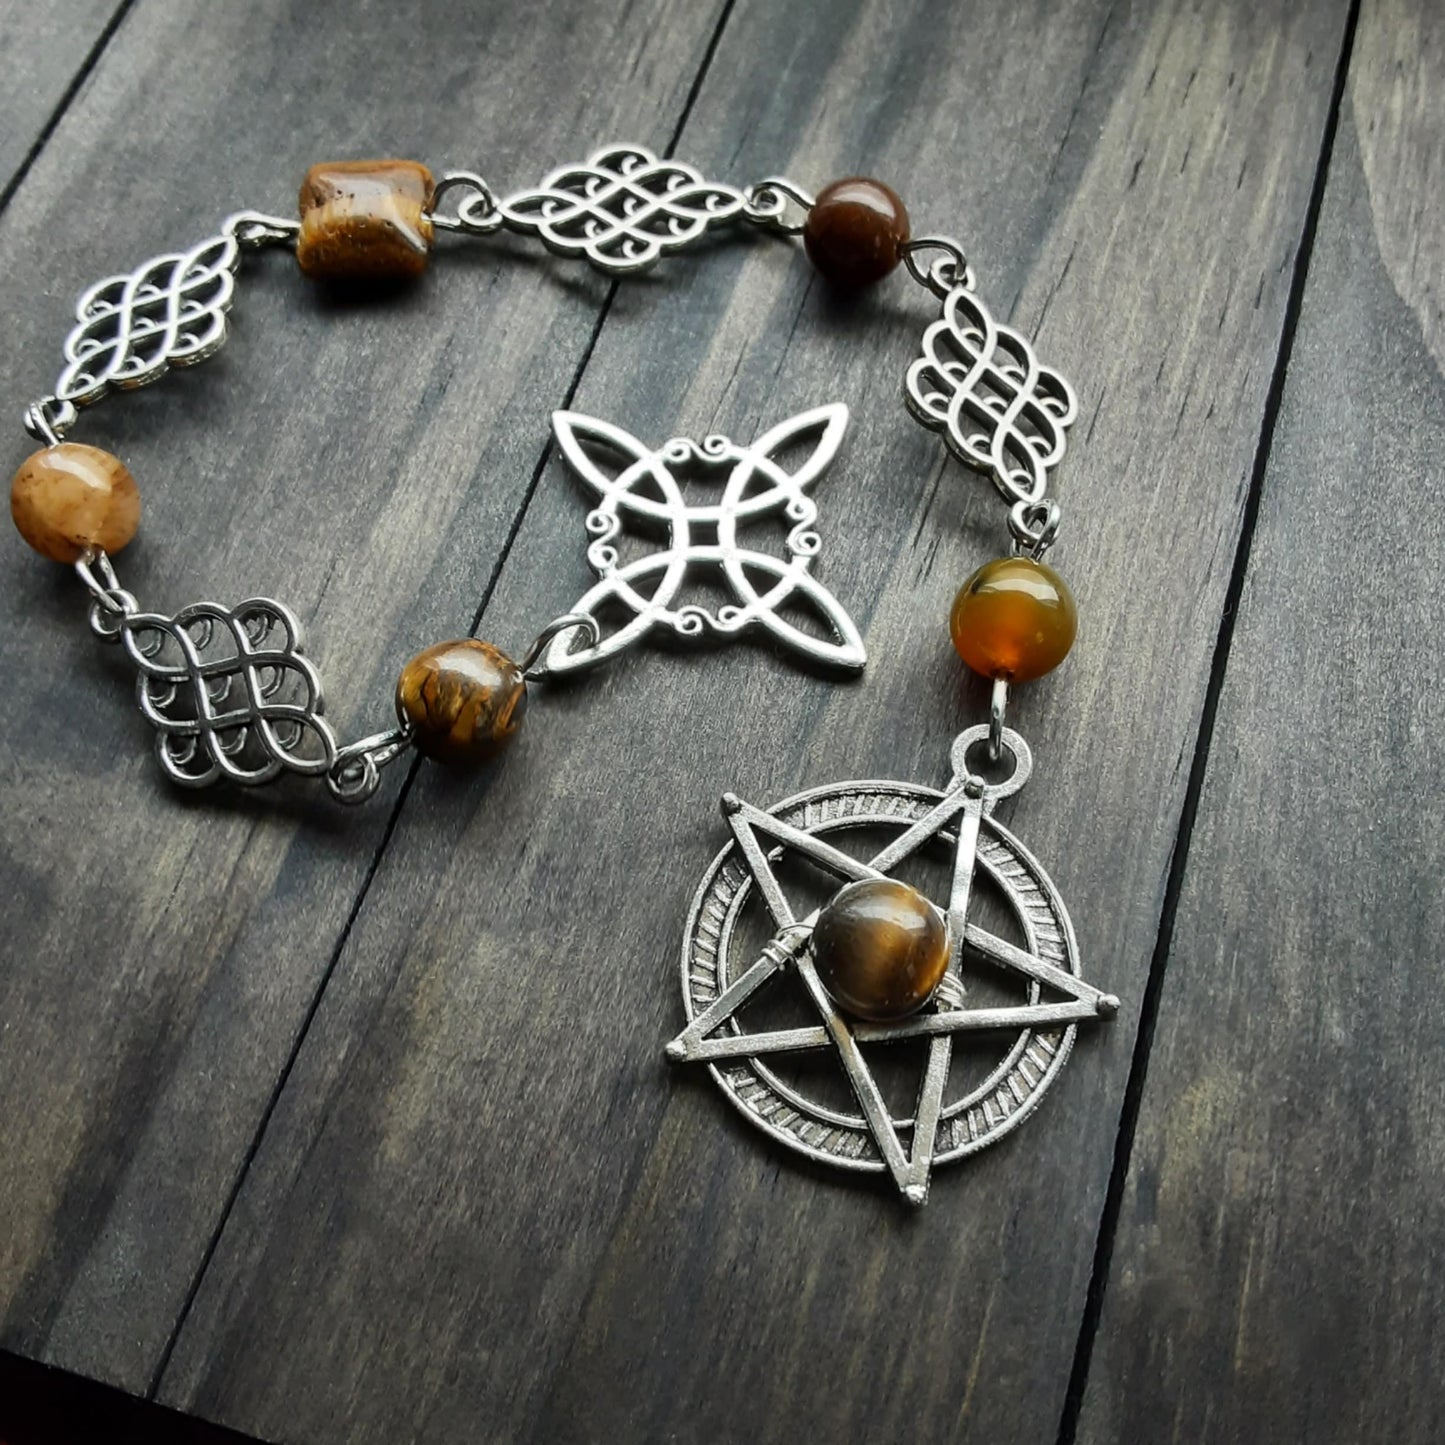 Pagan prayer beads with Tiger Eye gemstone pentacle and witch knot Protection Amulet altar tools Witch's ladder prayer beads